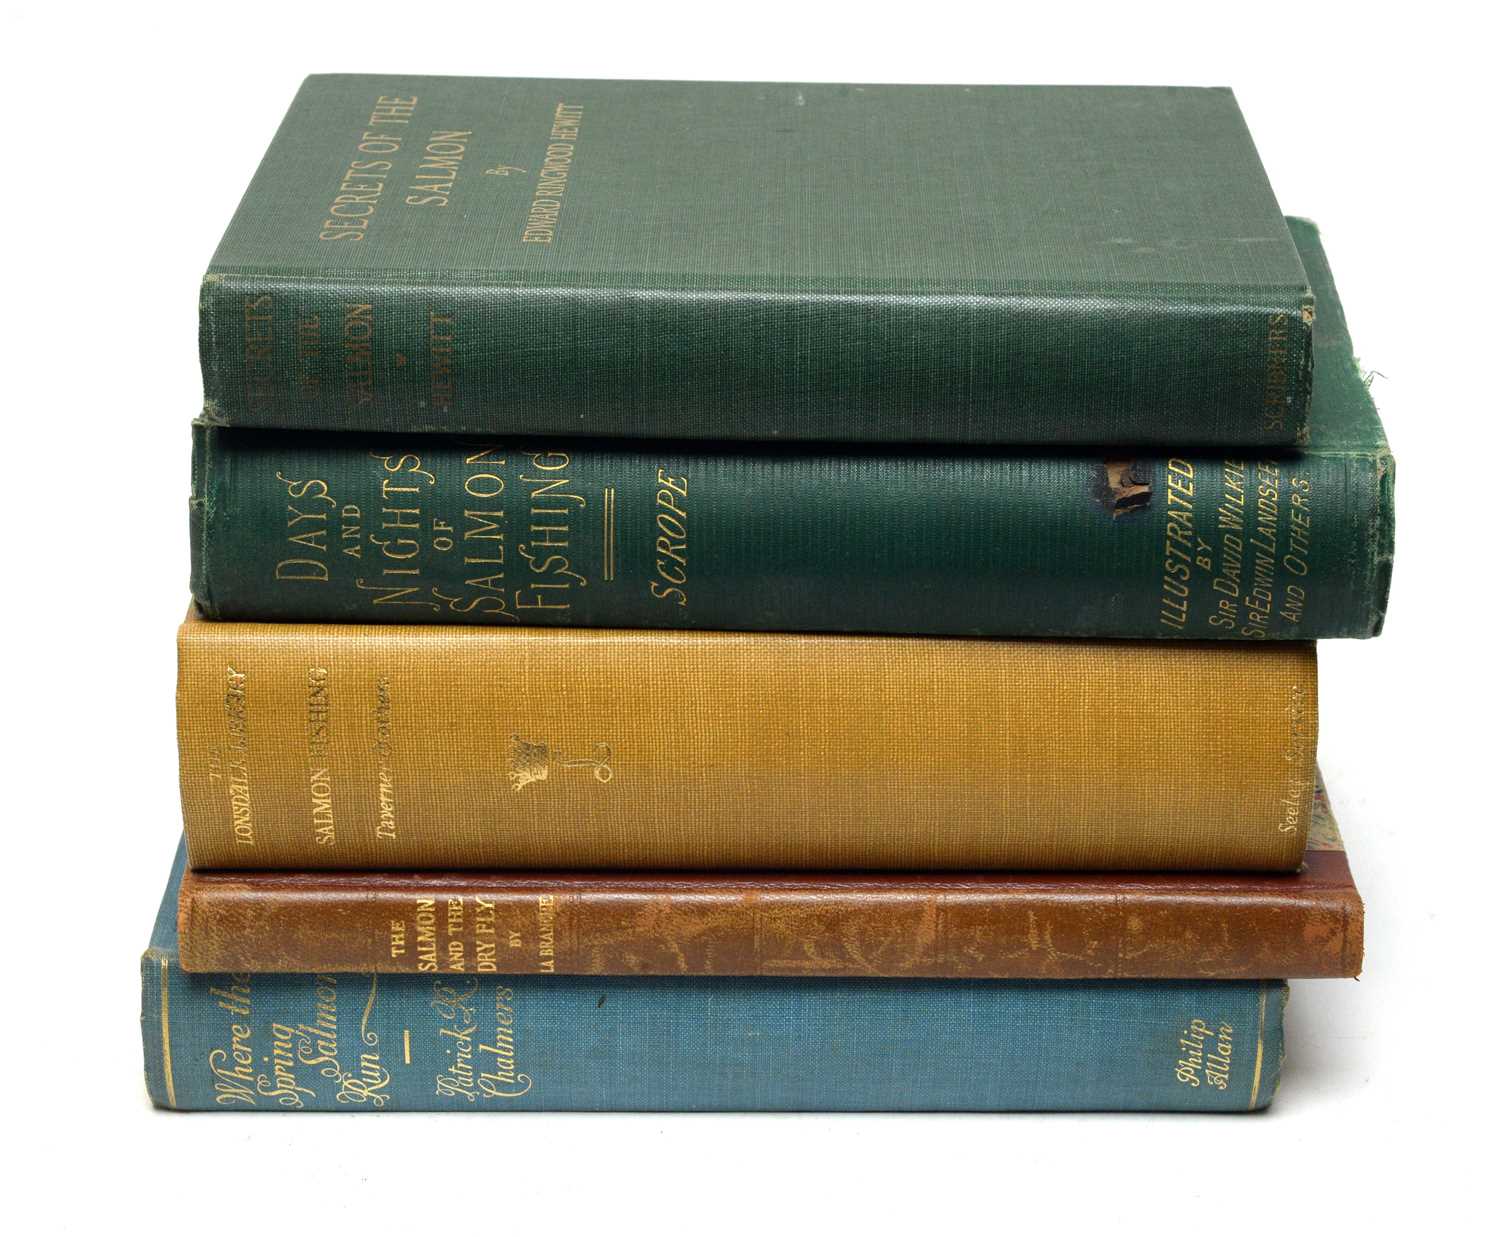 Lot 856 - LaBranche (George M.L.) The Salmon and the Dry Fly, and books on angling